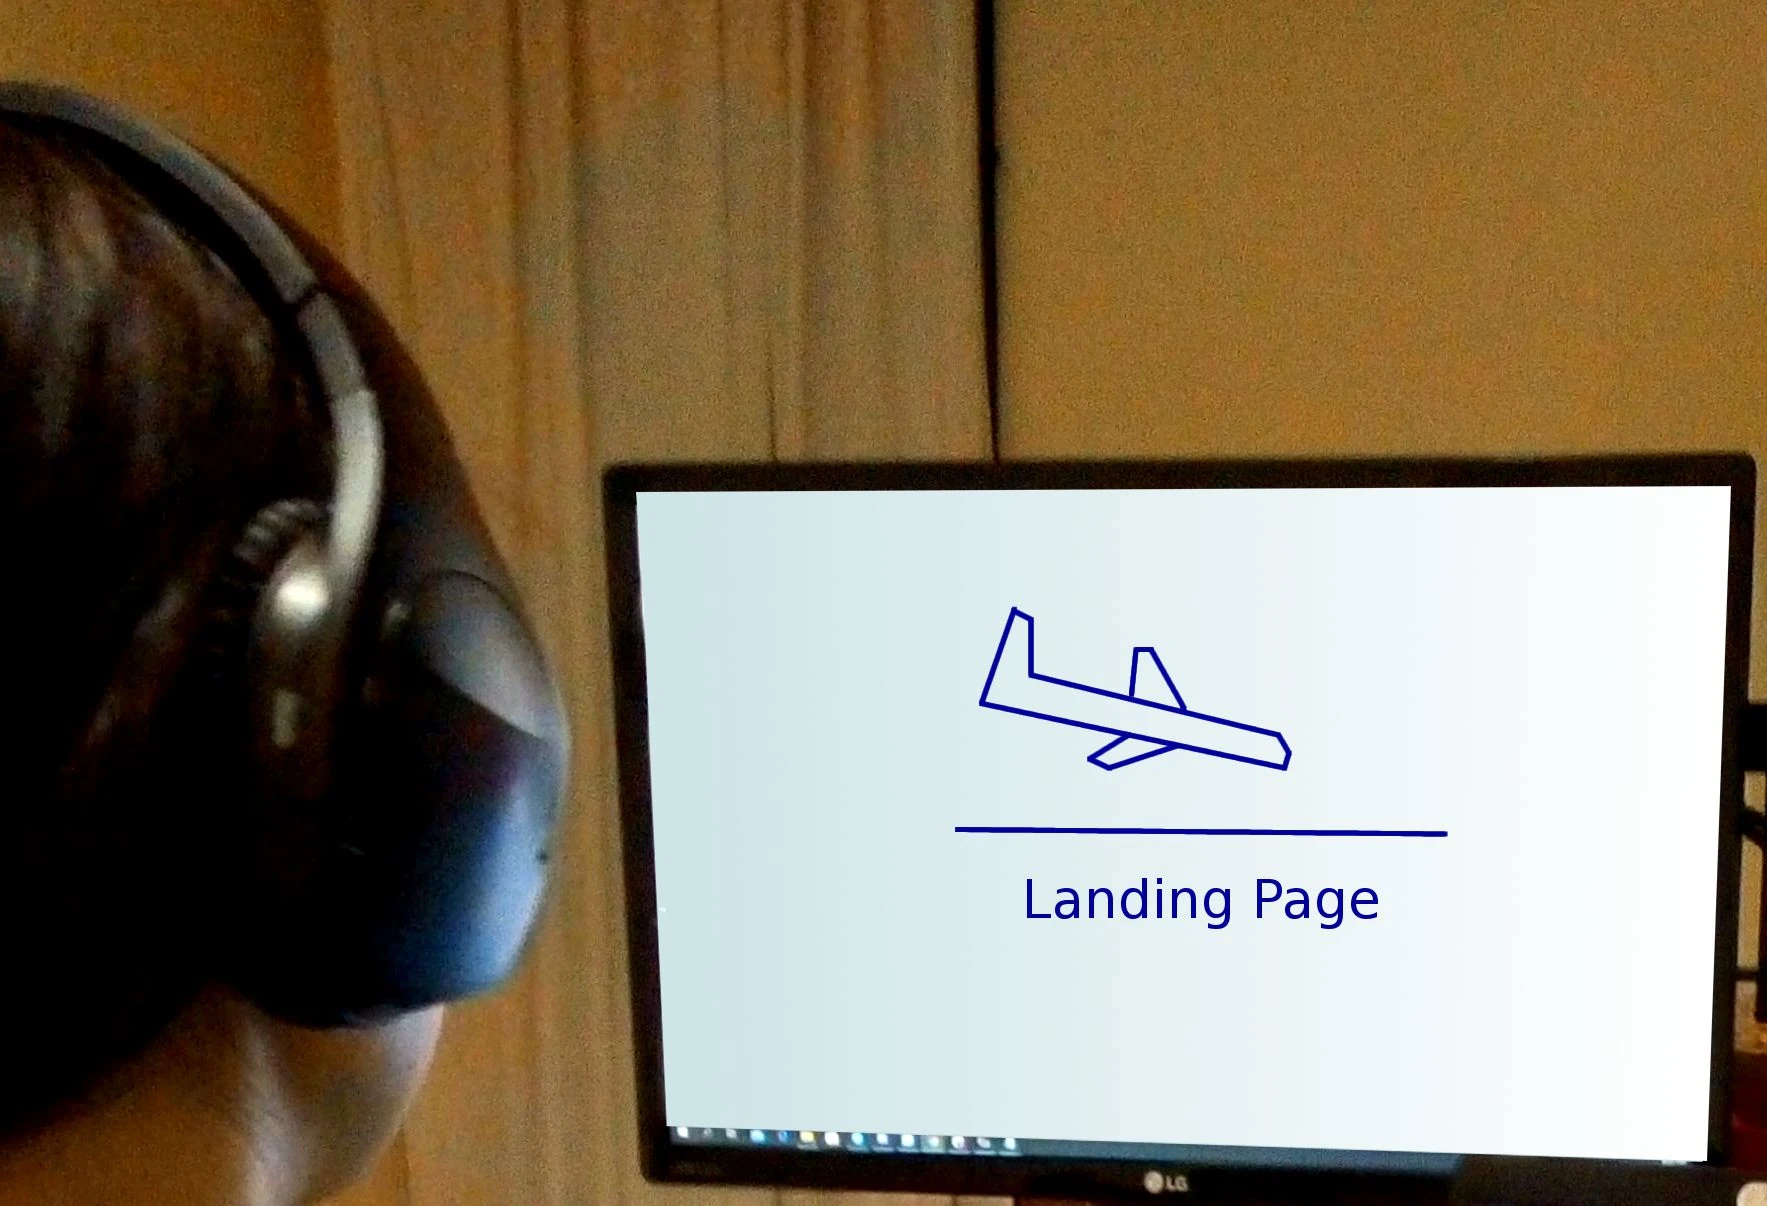 A landing page on computer screen